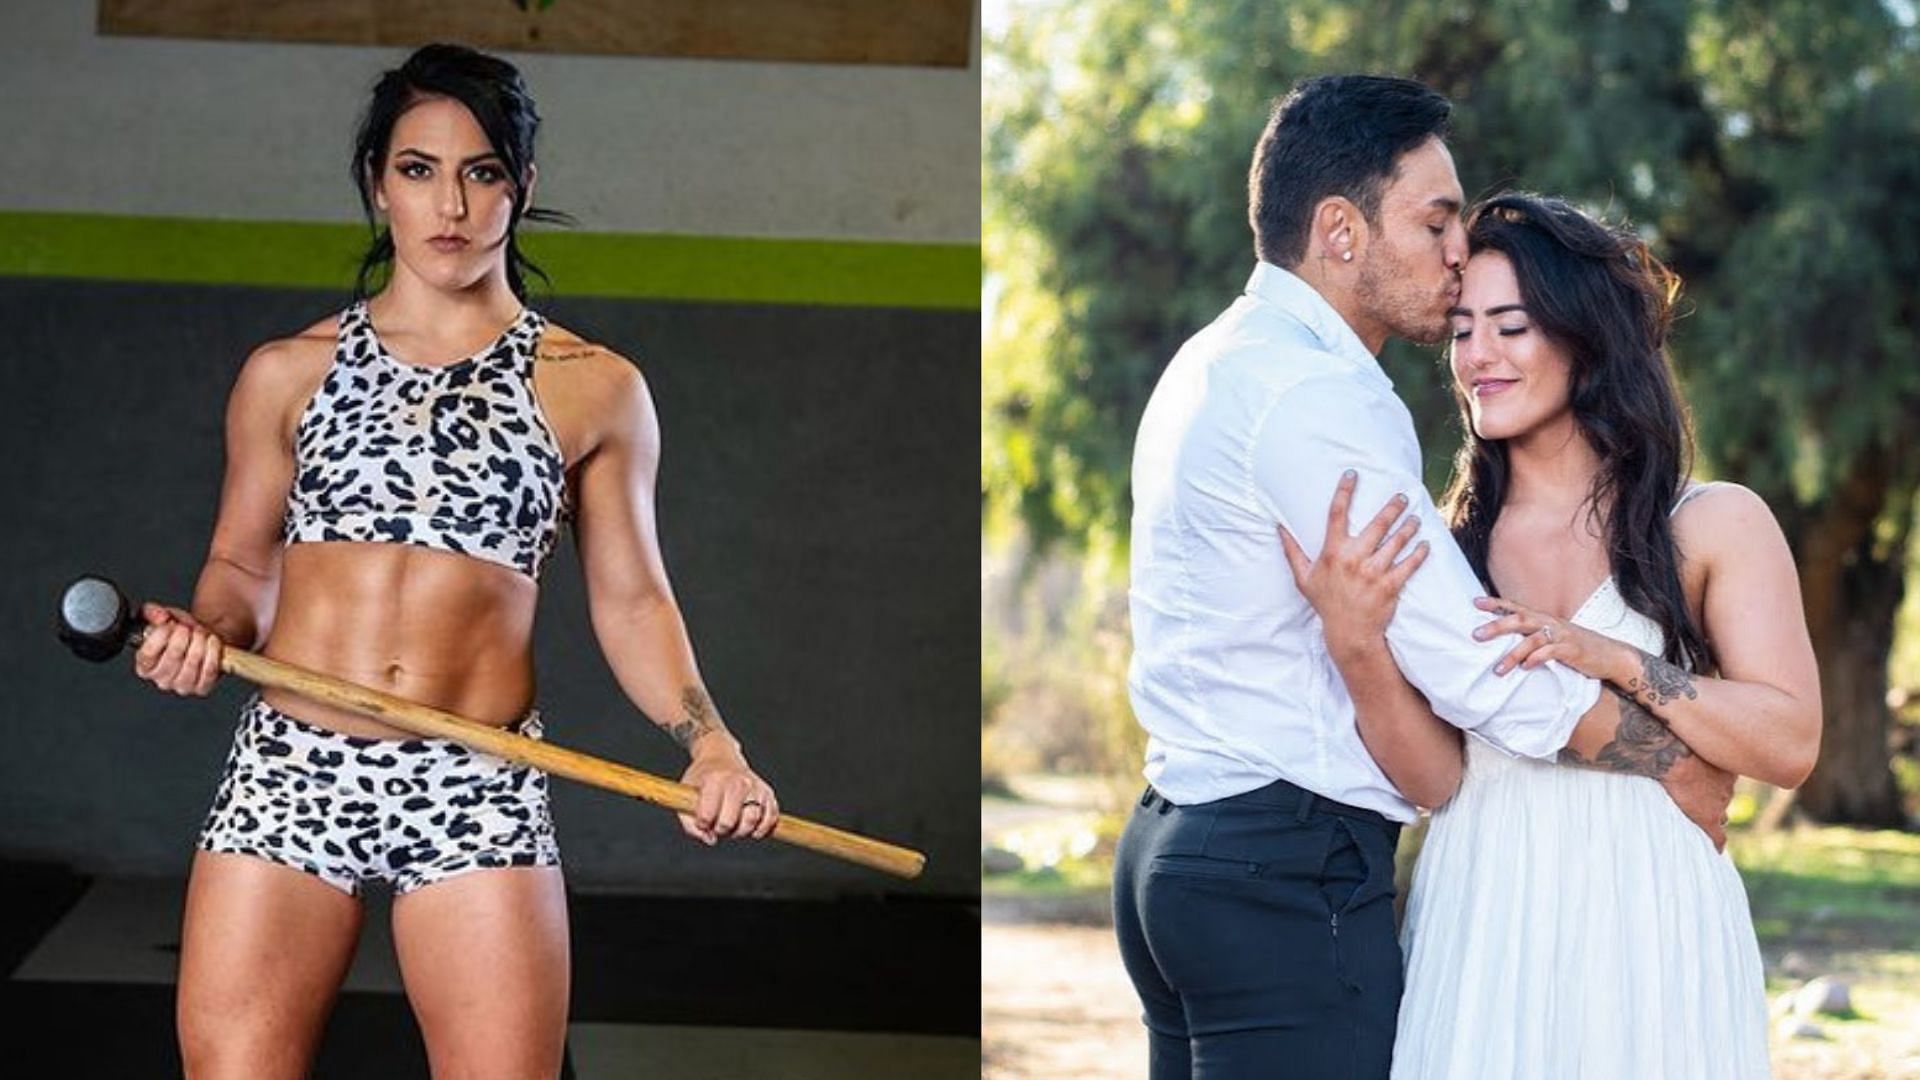 Tessa Blanchard got married with her ex-husband in 2020